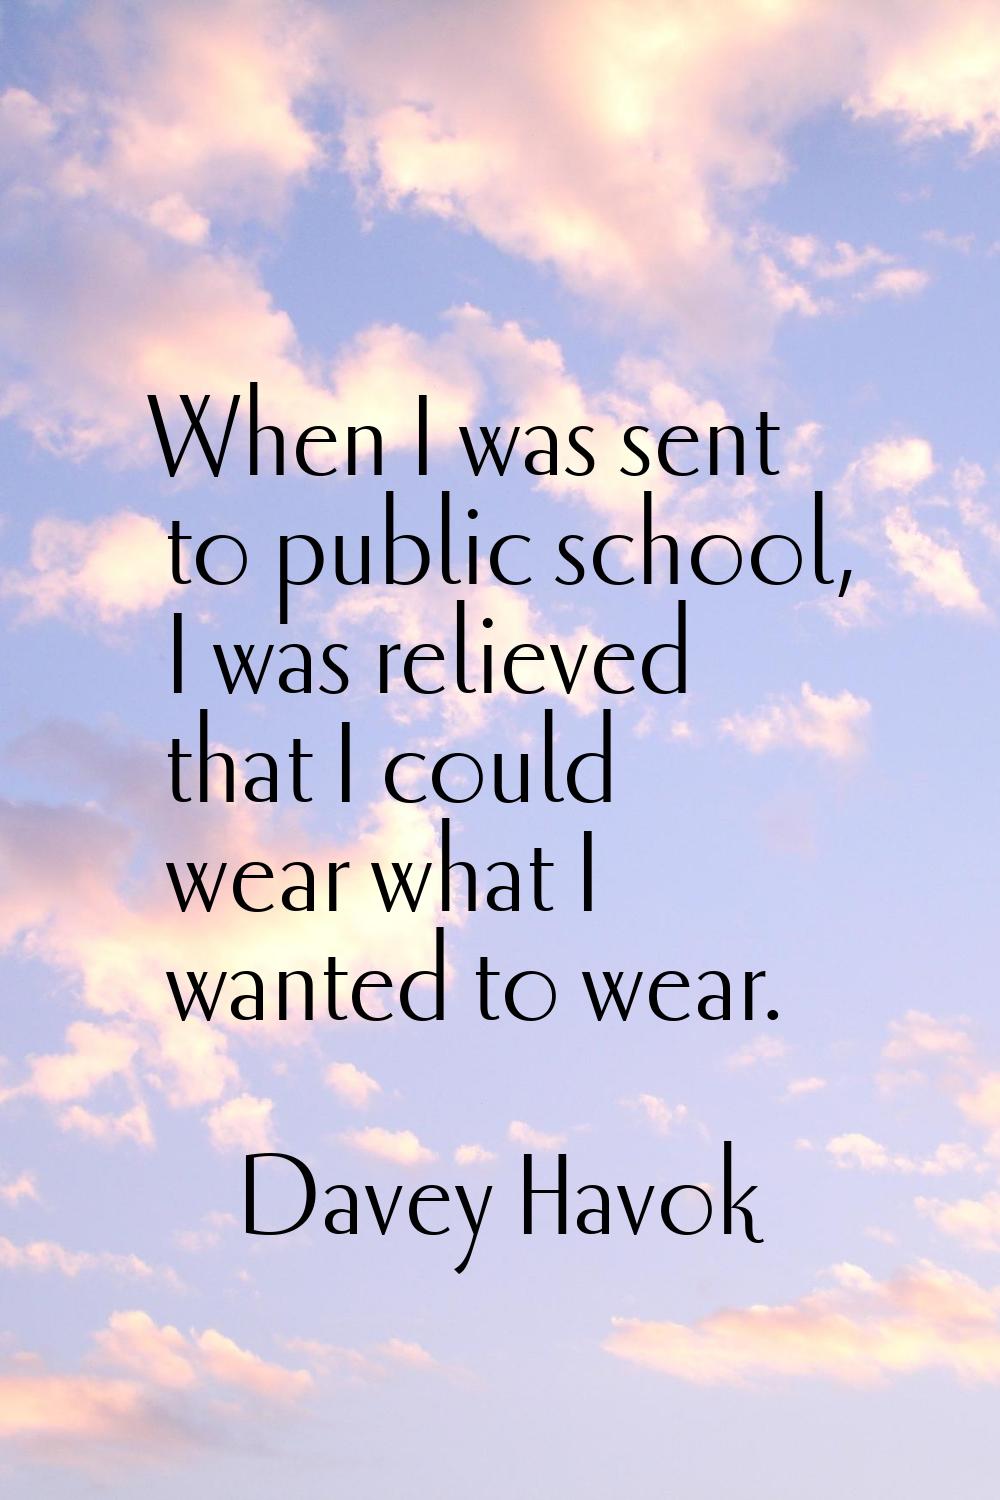 When I was sent to public school, I was relieved that I could wear what I wanted to wear.